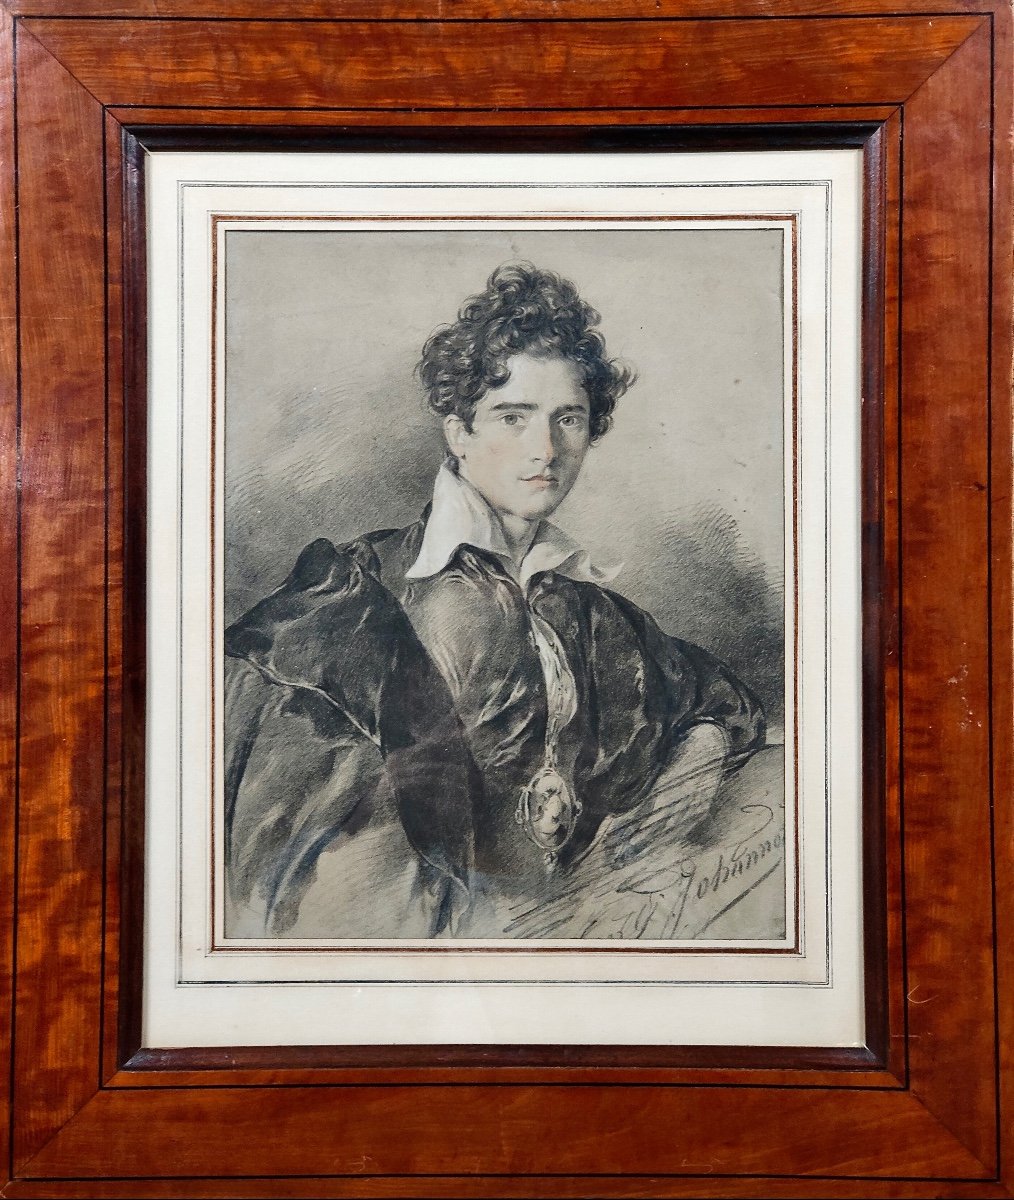 Proantic Tony Johannot (18031852) Pencil Drawing Portrait Of A Young